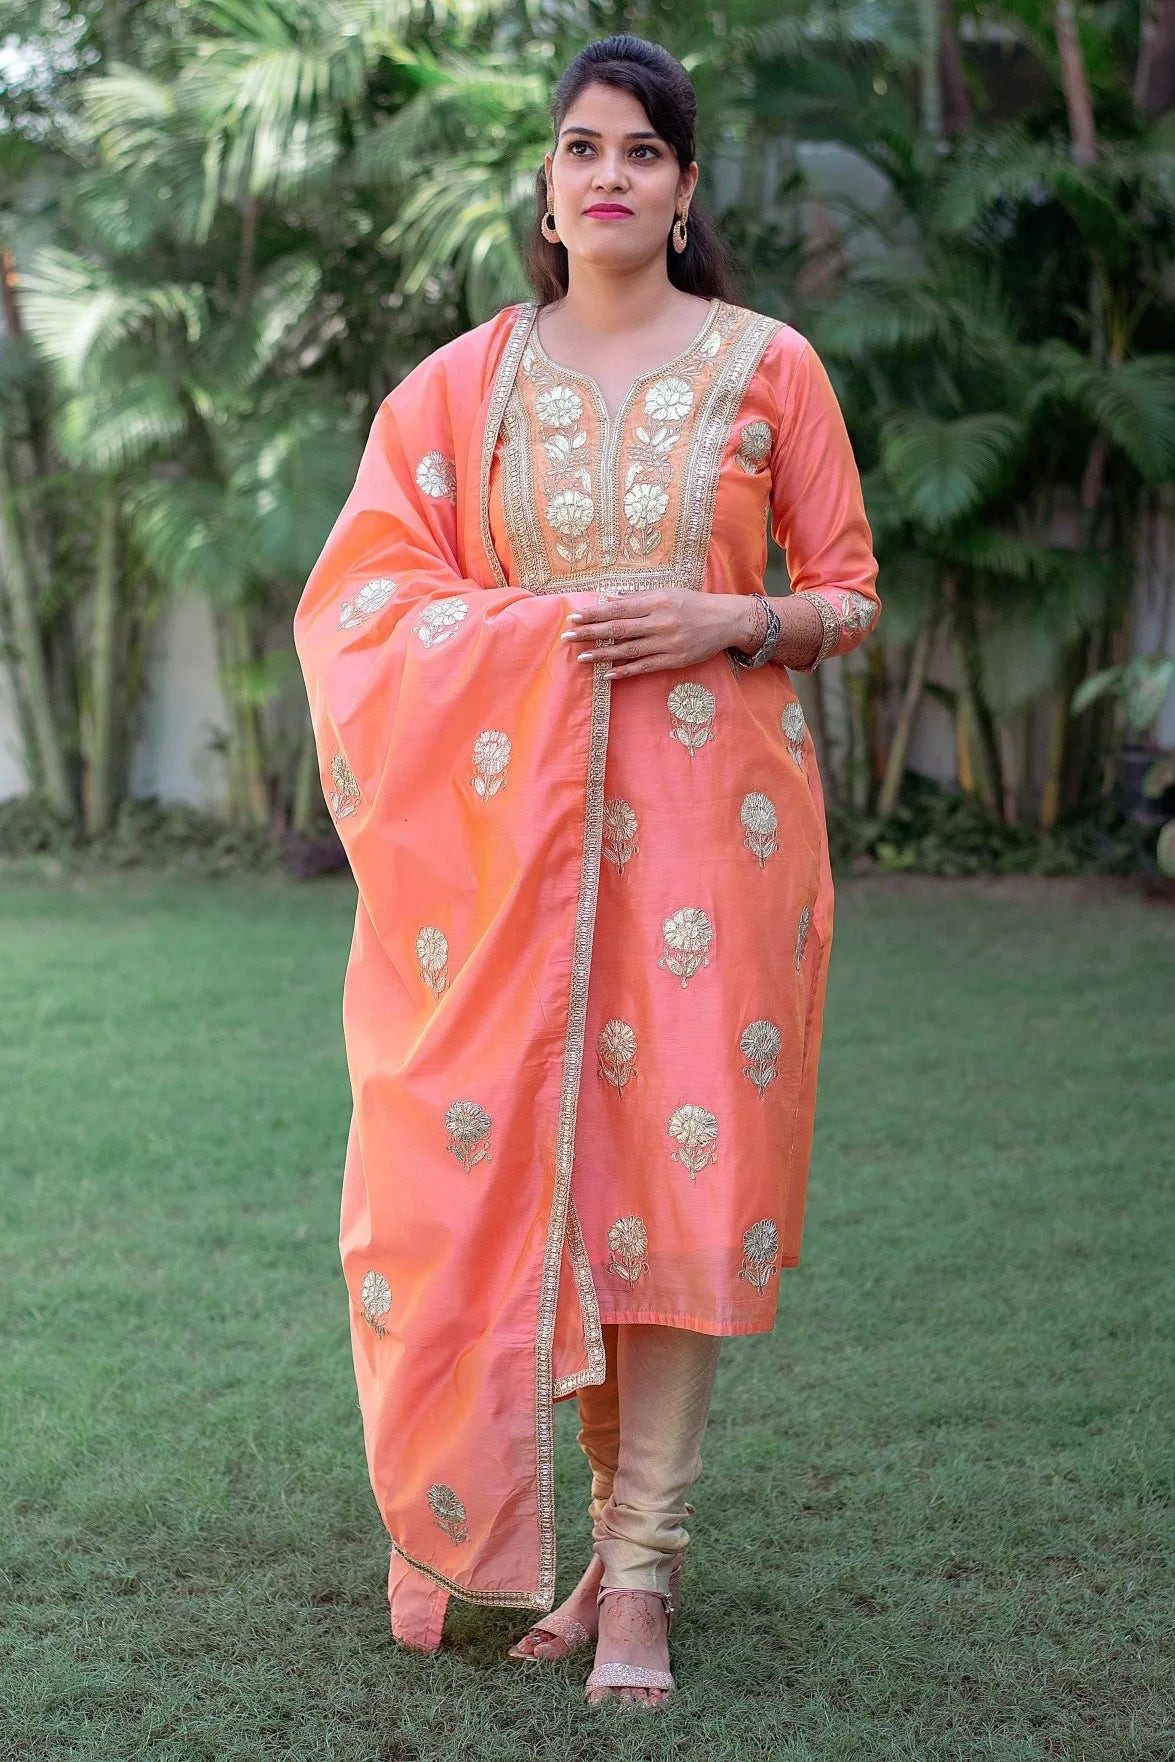 A woman in a Peach Chanderi Kurta with Gota Work and a Dupatta, paired with a Golden Churidar.